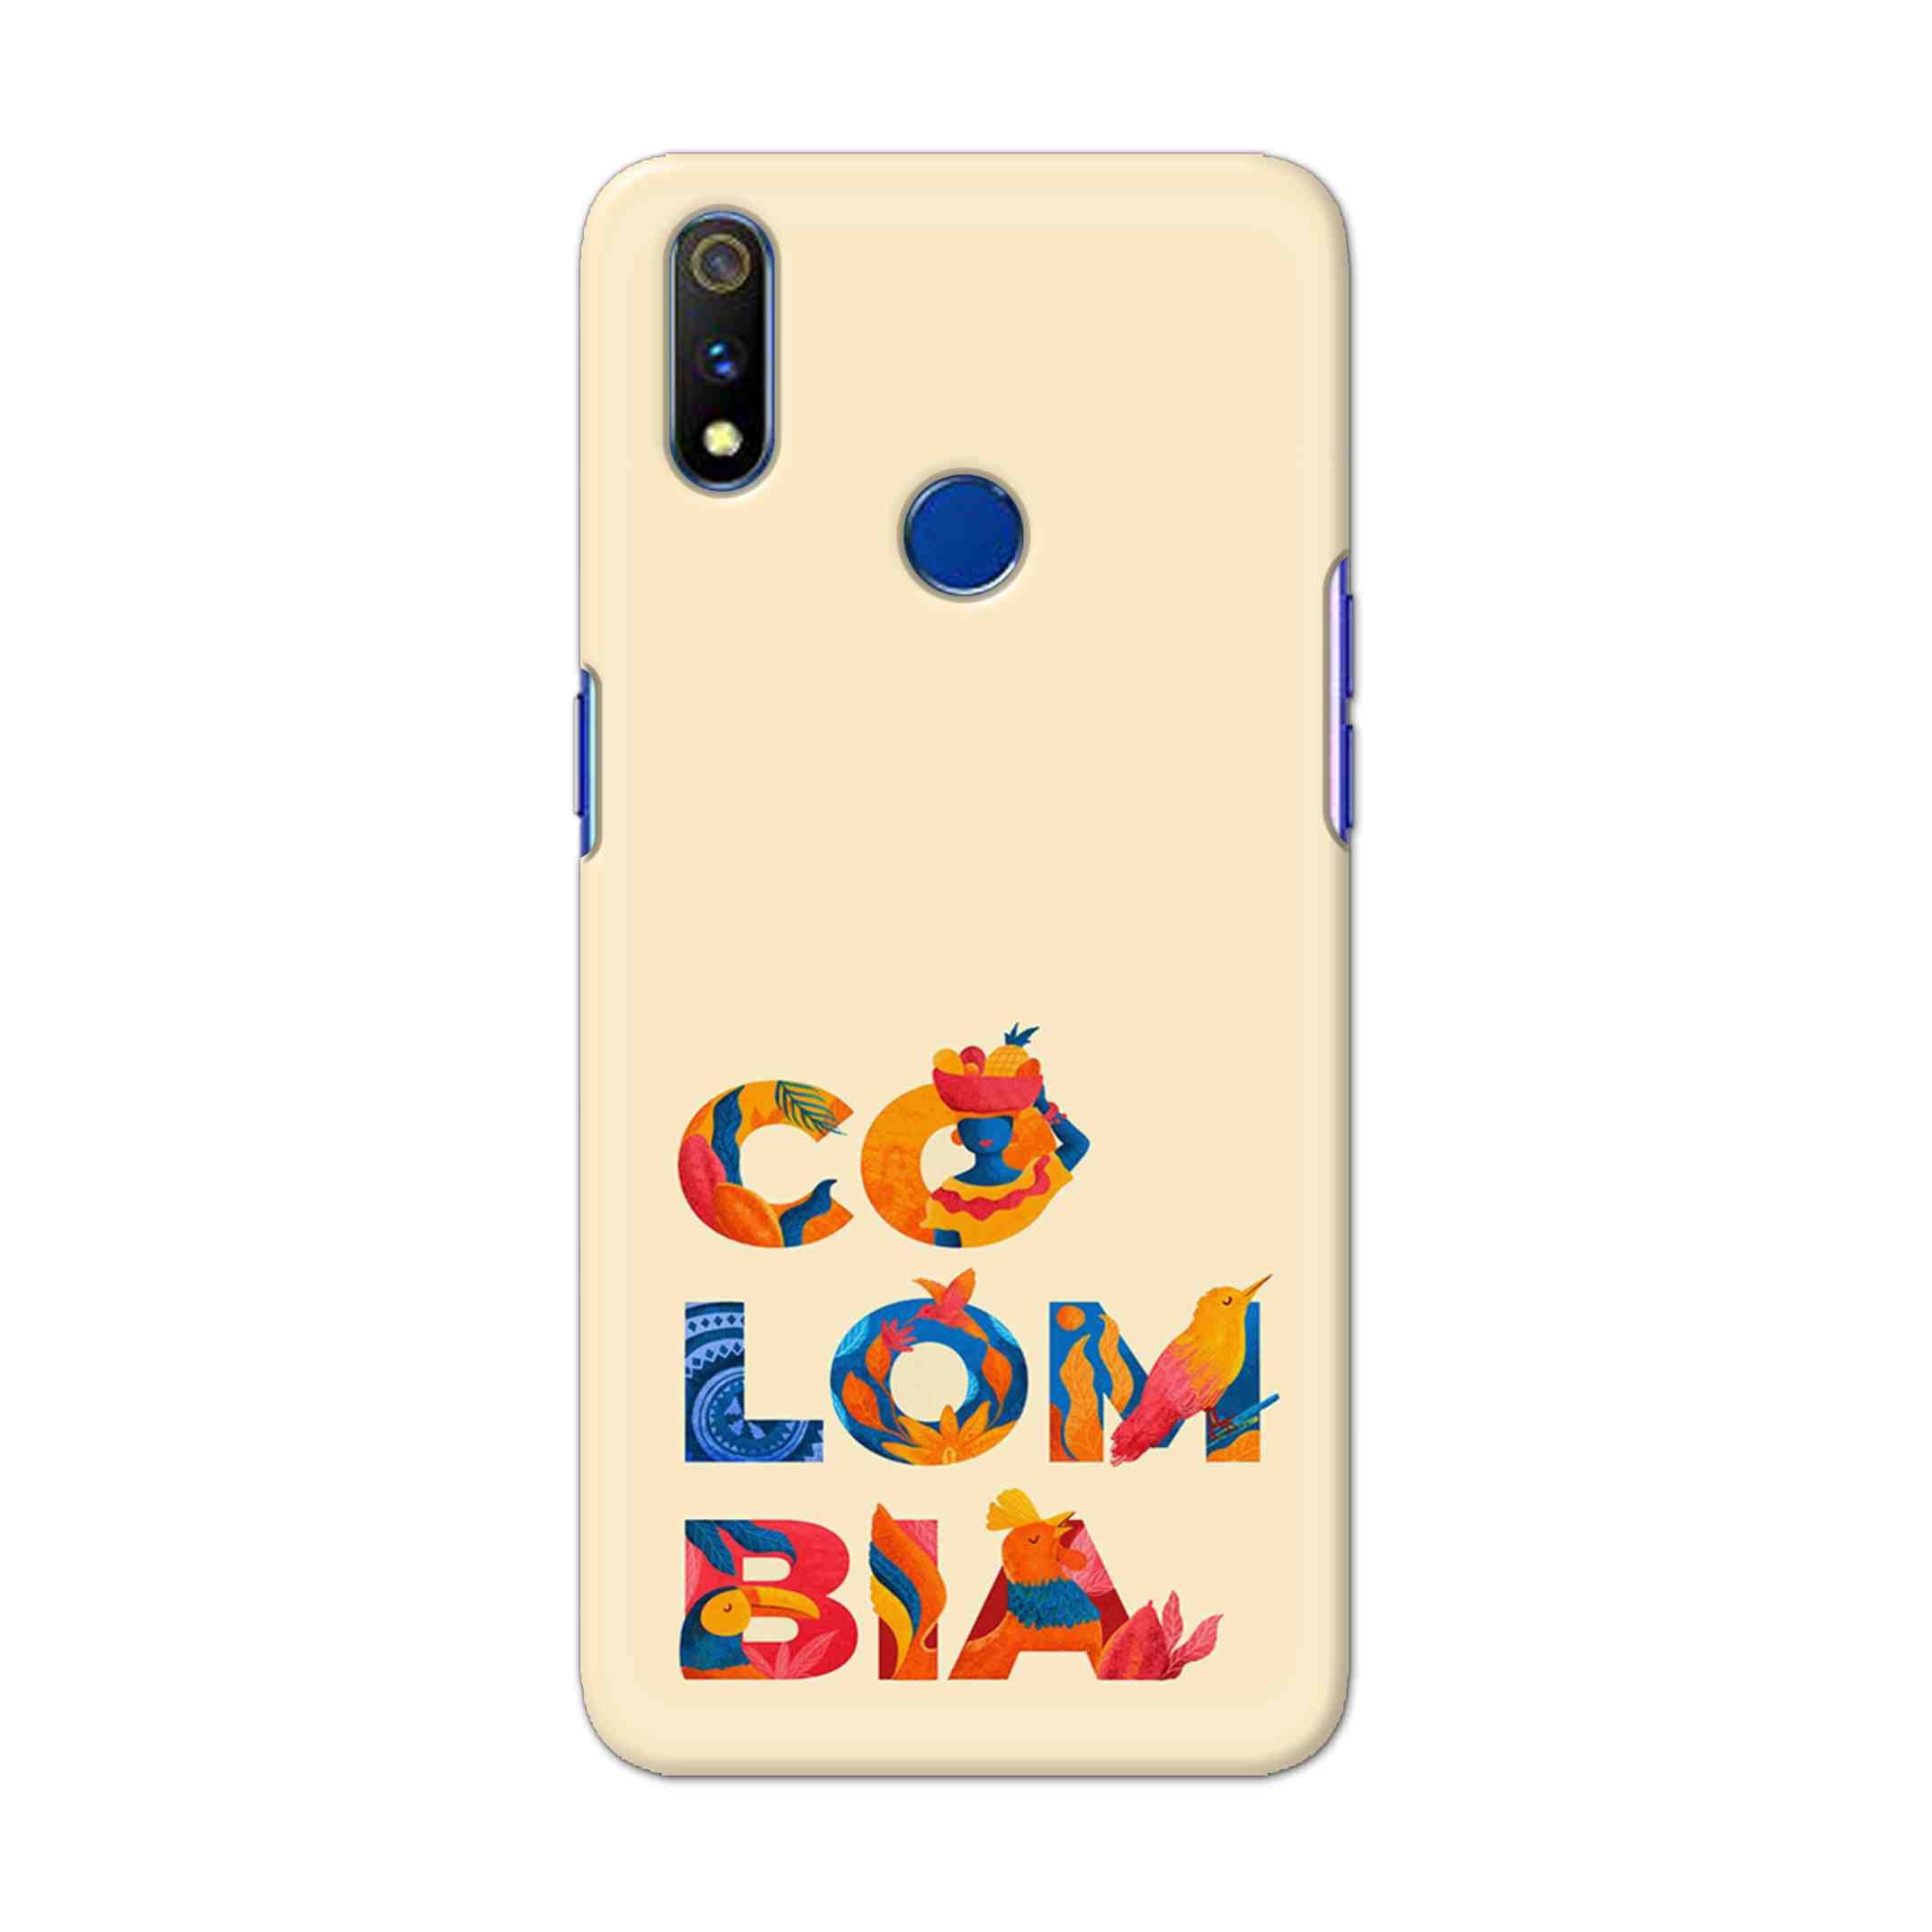 Buy Colombia Hard Back Mobile Phone Case Cover For Realme 3 Pro Online